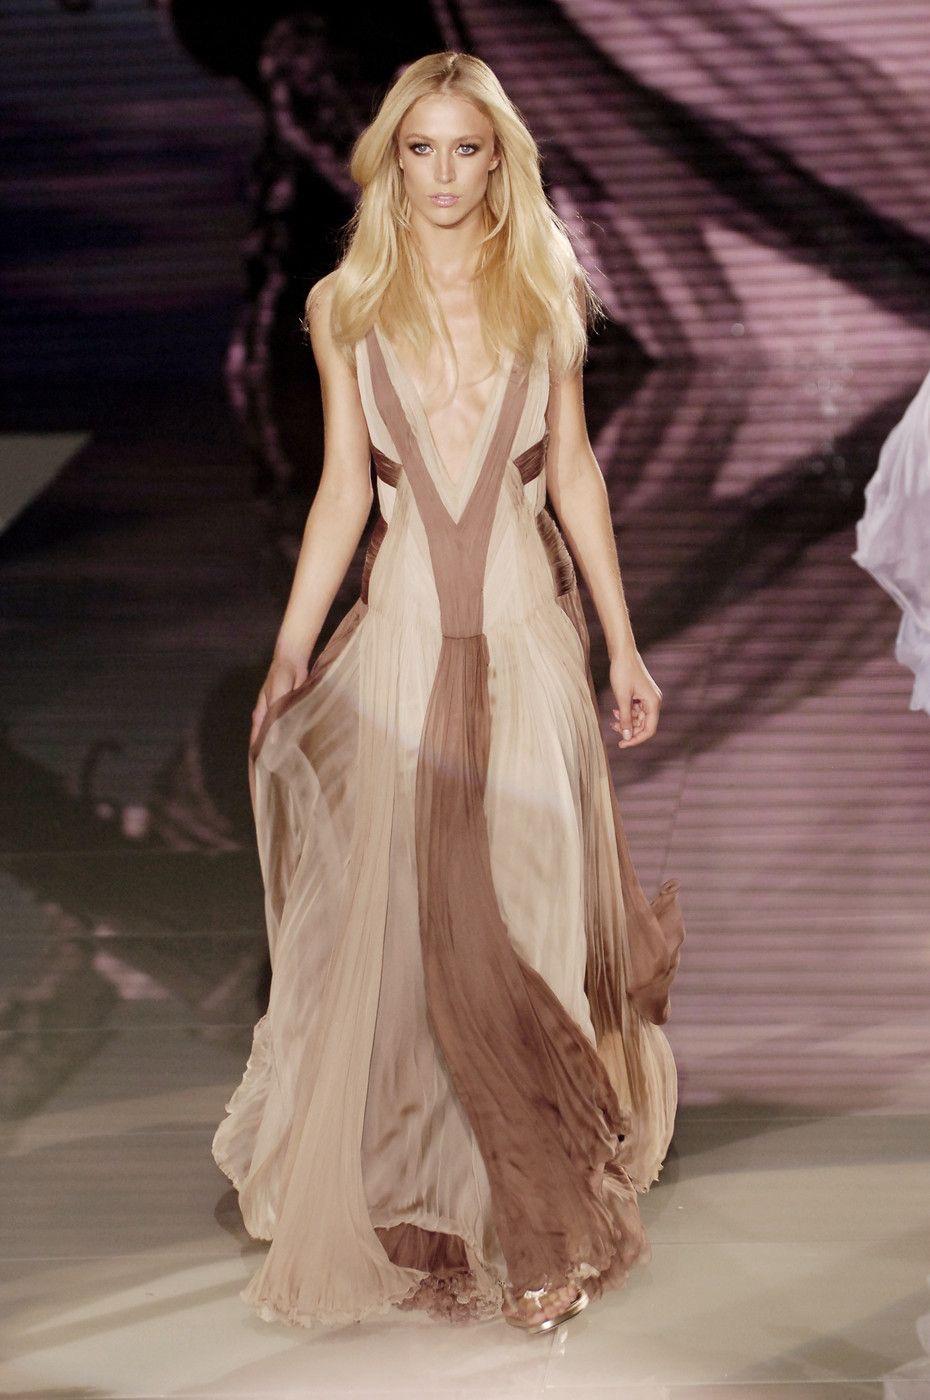  S/S 2006 Look #50 Versace Silk Gown

Finished with tulle bodysuit

IT Size 42

Airy, delicate, classy and sexy!

